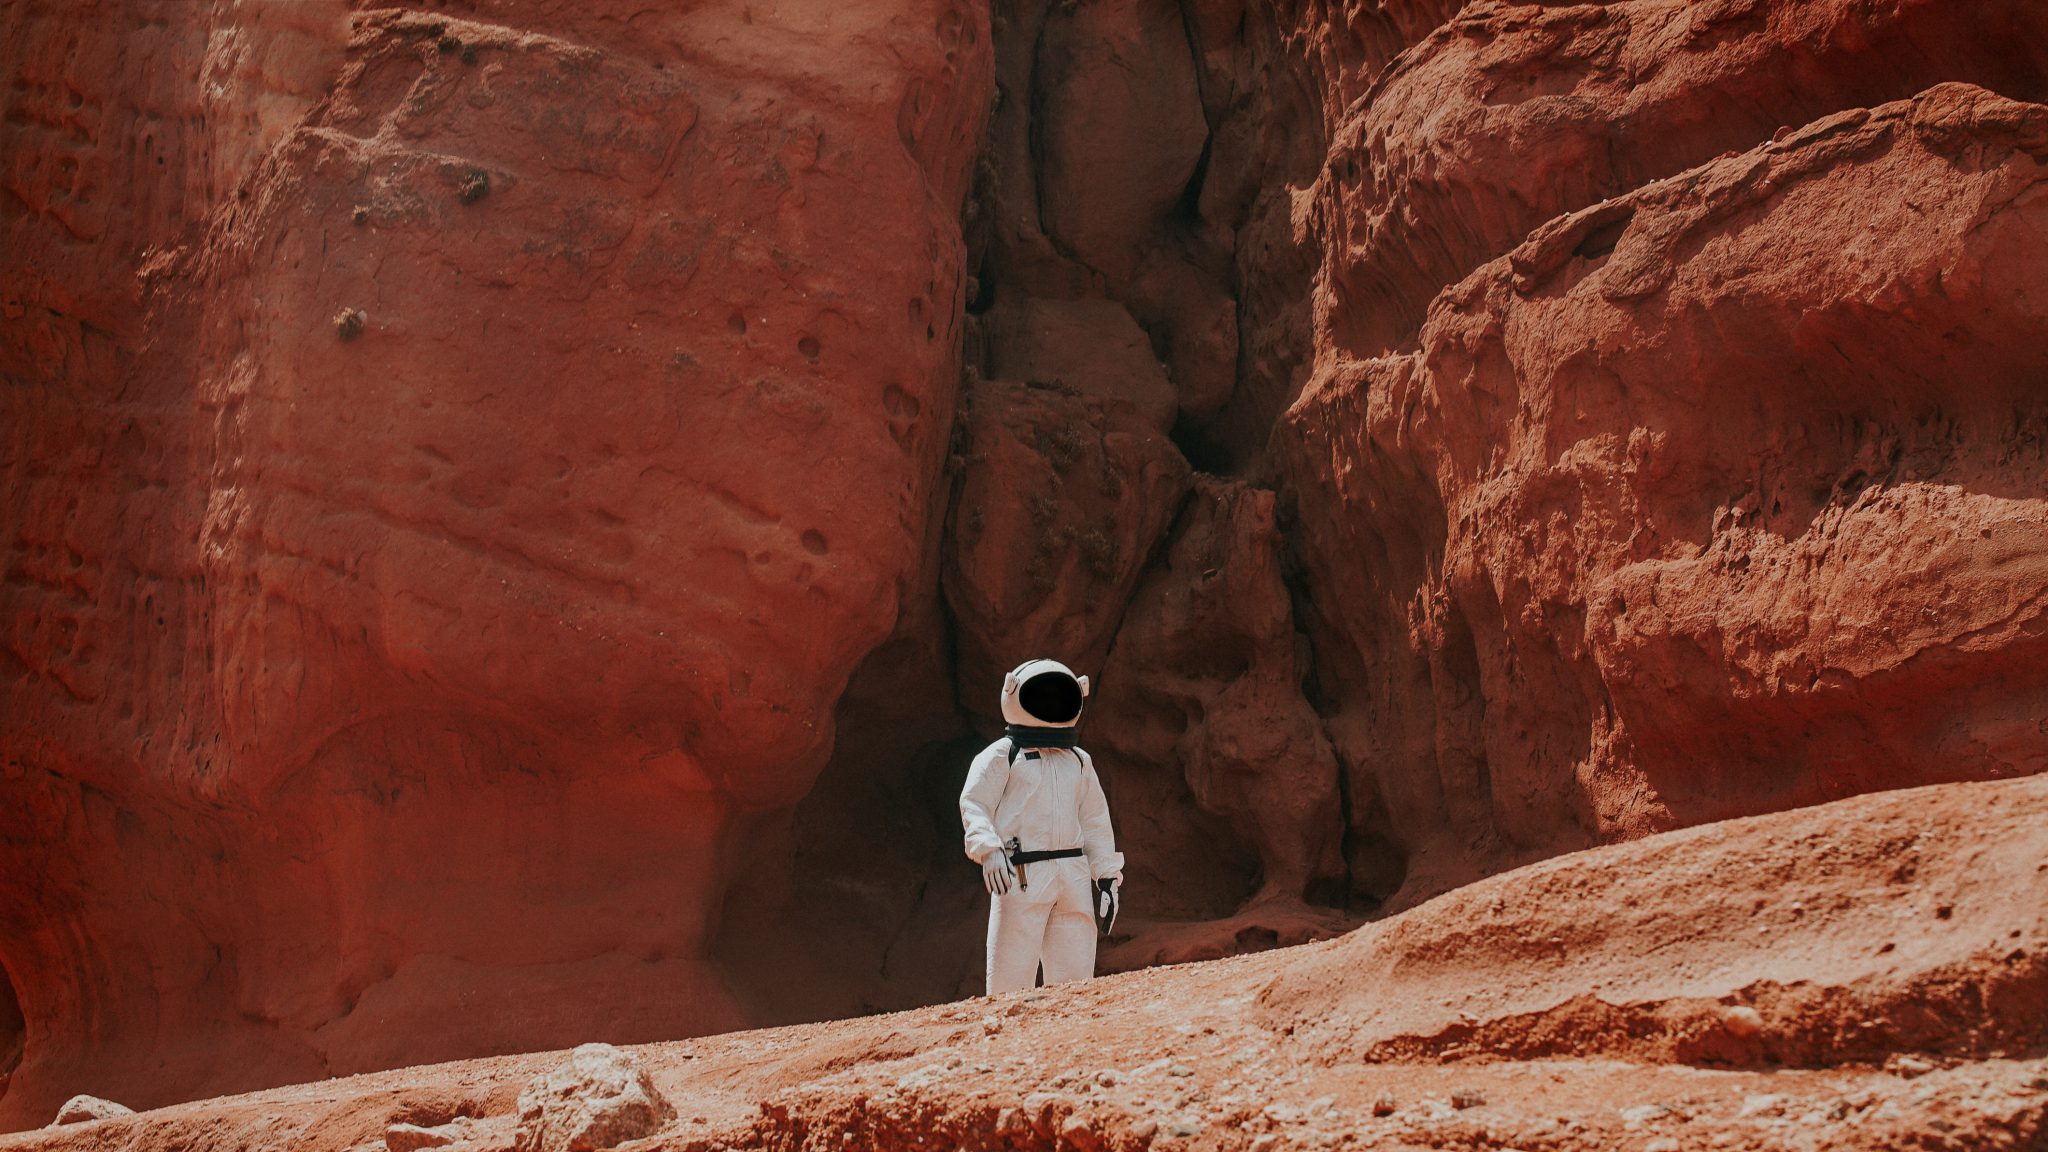 An astronaut on the surface of a red planet (or maybe it's just the red part of an otherwise verdant planet, how the hell should I know?)